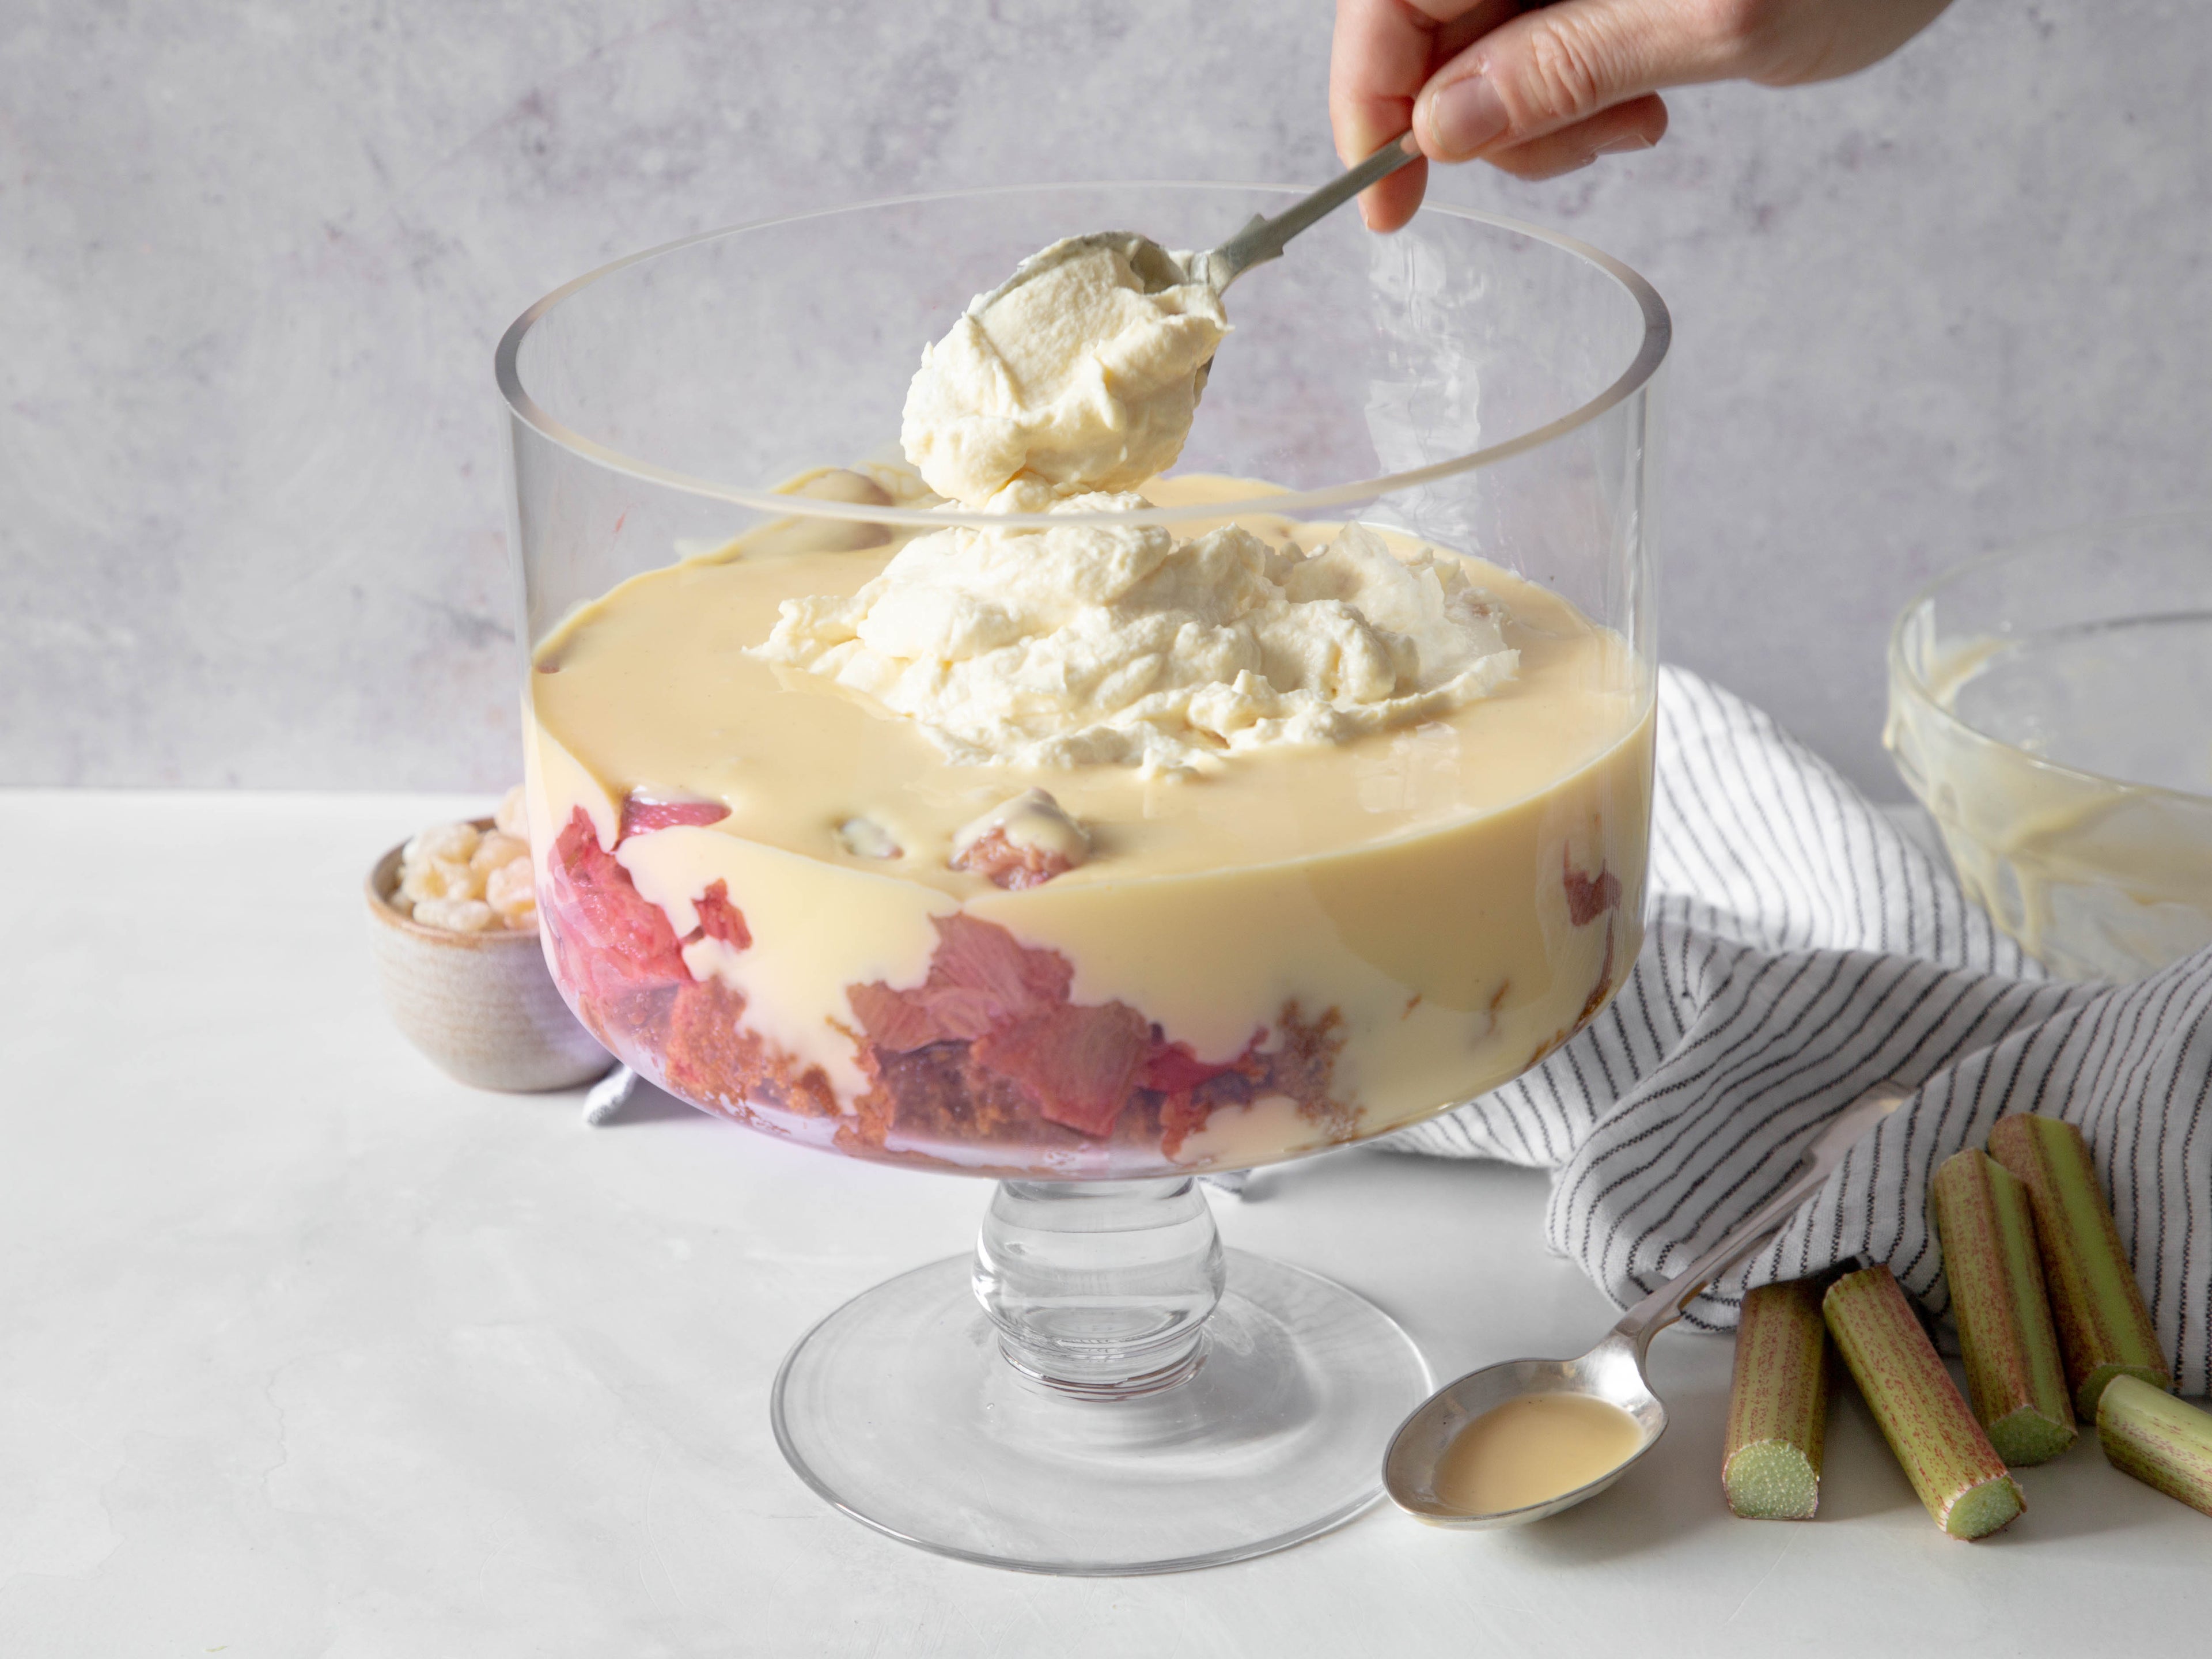 Trifle bowl filled with rhubarb and custard and a hand spooning in some cream on top. In the background there is a spoon, striped tea towel chopped rhubarb and a small bowl of nuts.